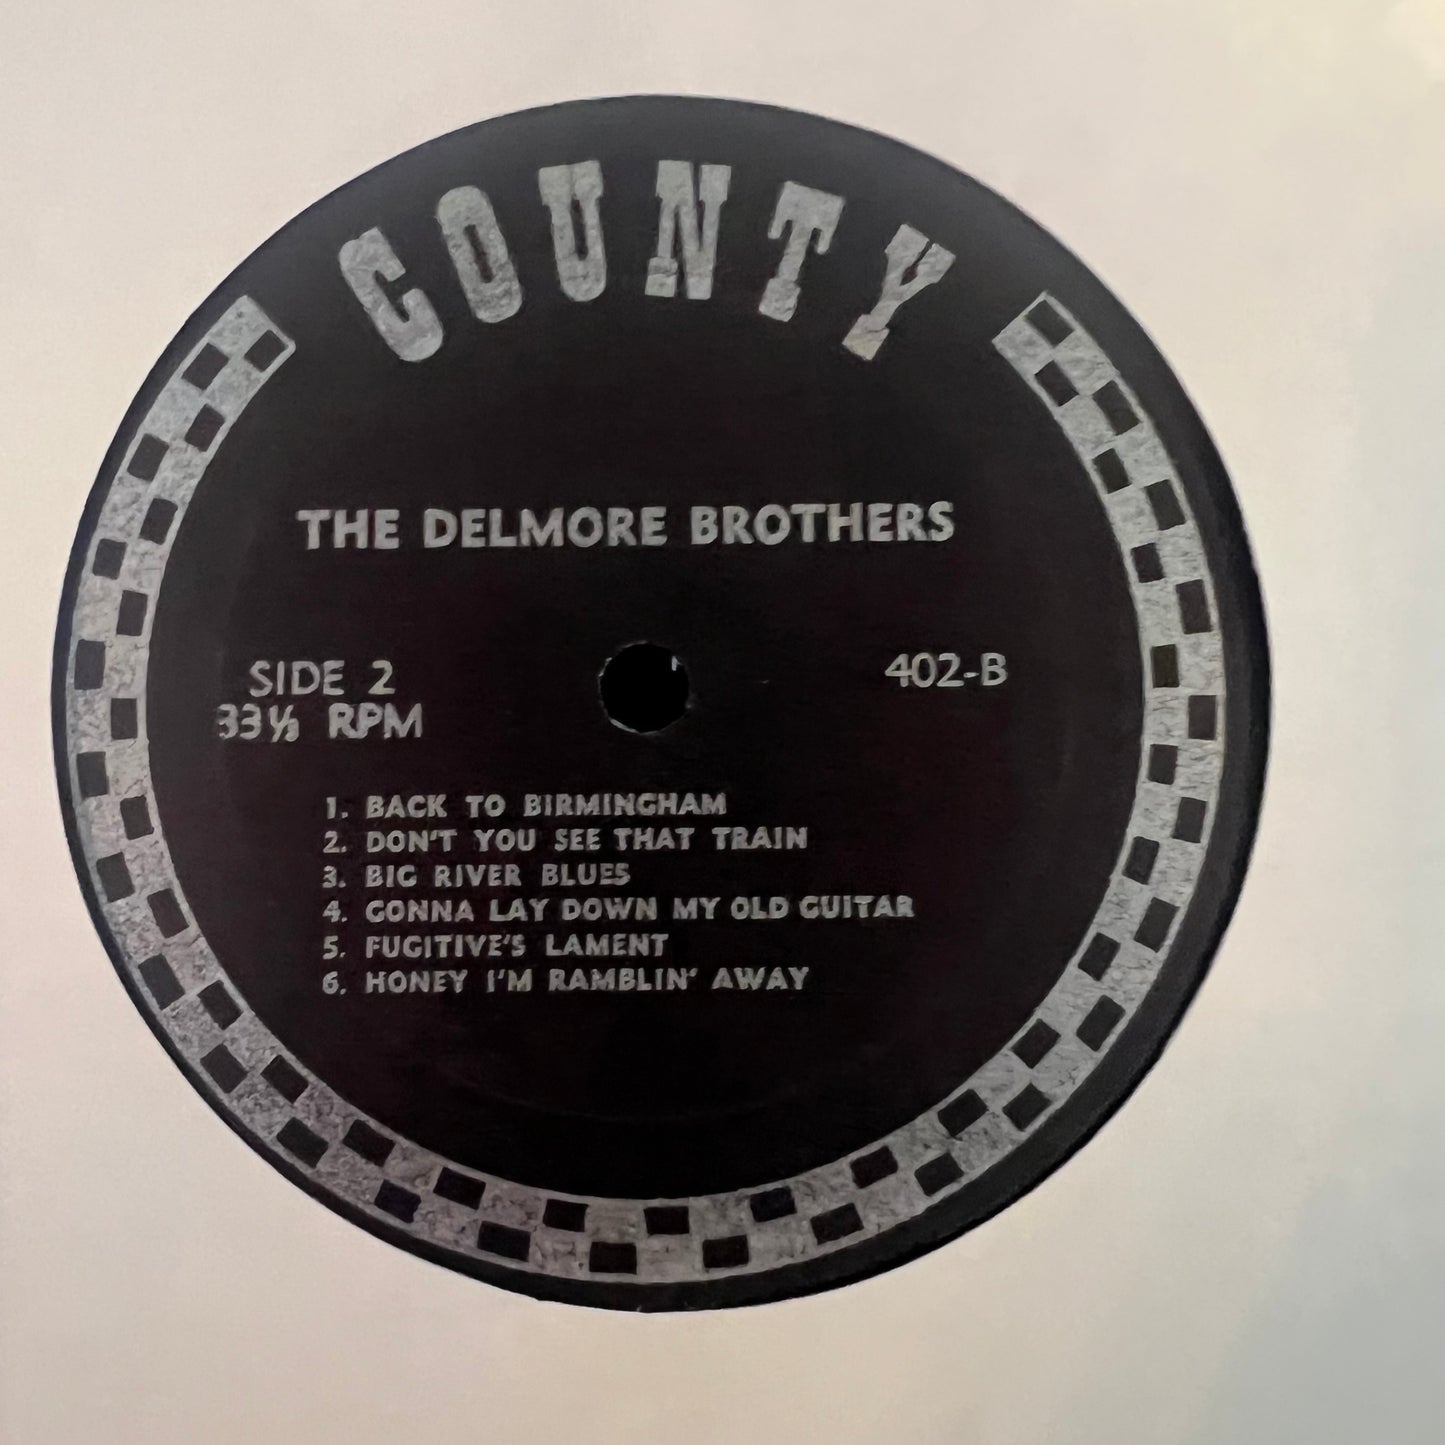 The Delmore Brothers Brown's Ferry Blues: 1933-41 Recordings LP Excellent (EX) Excellent (EX)